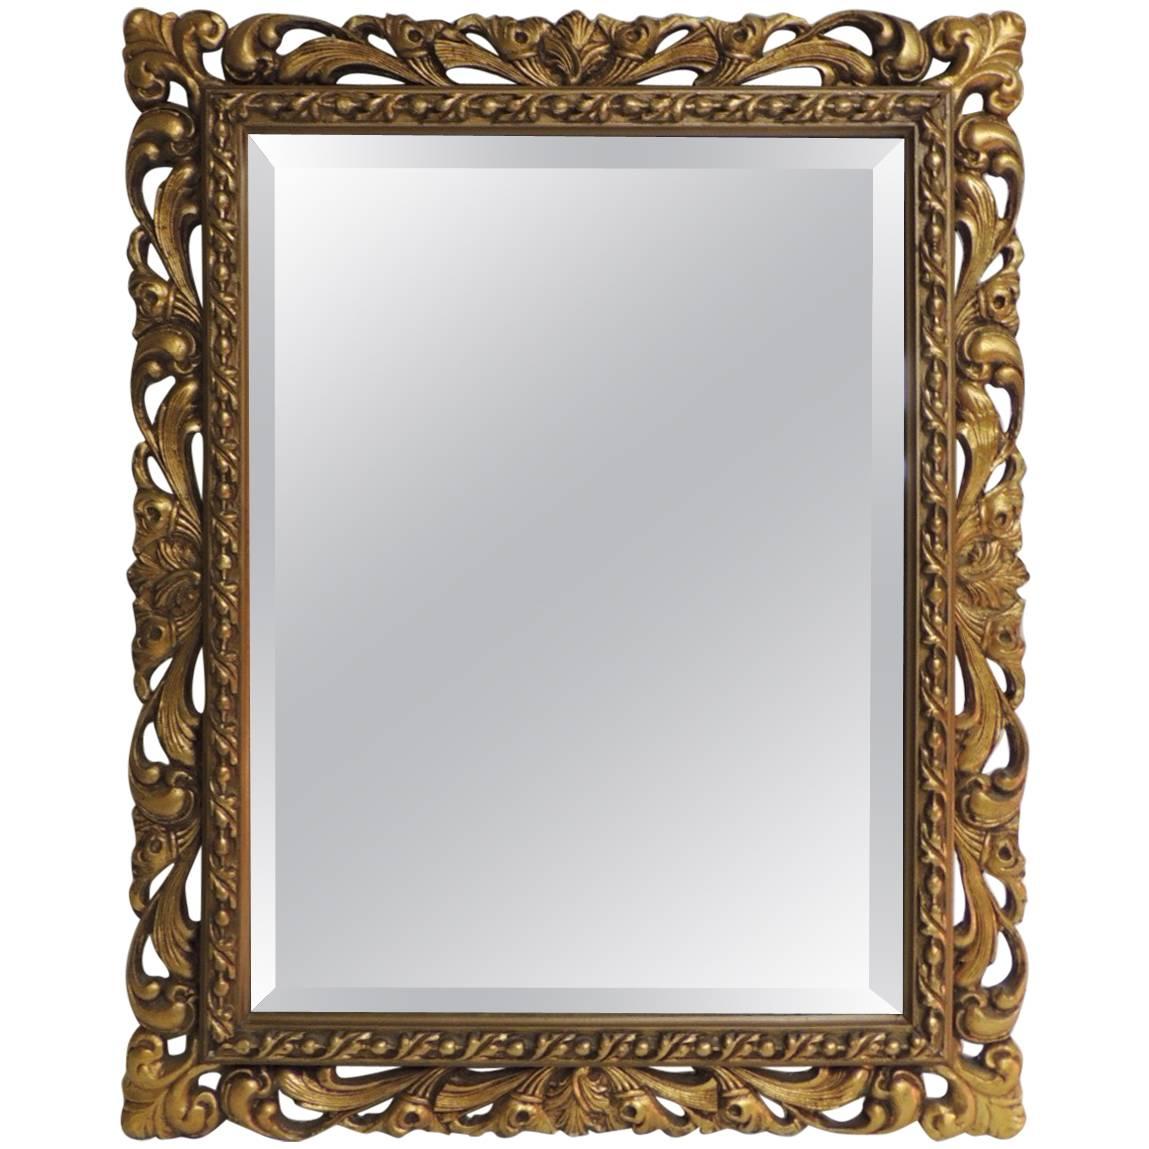 CLOSE OUT SALE: Antique Gilded Wood Frame Wall Mirror